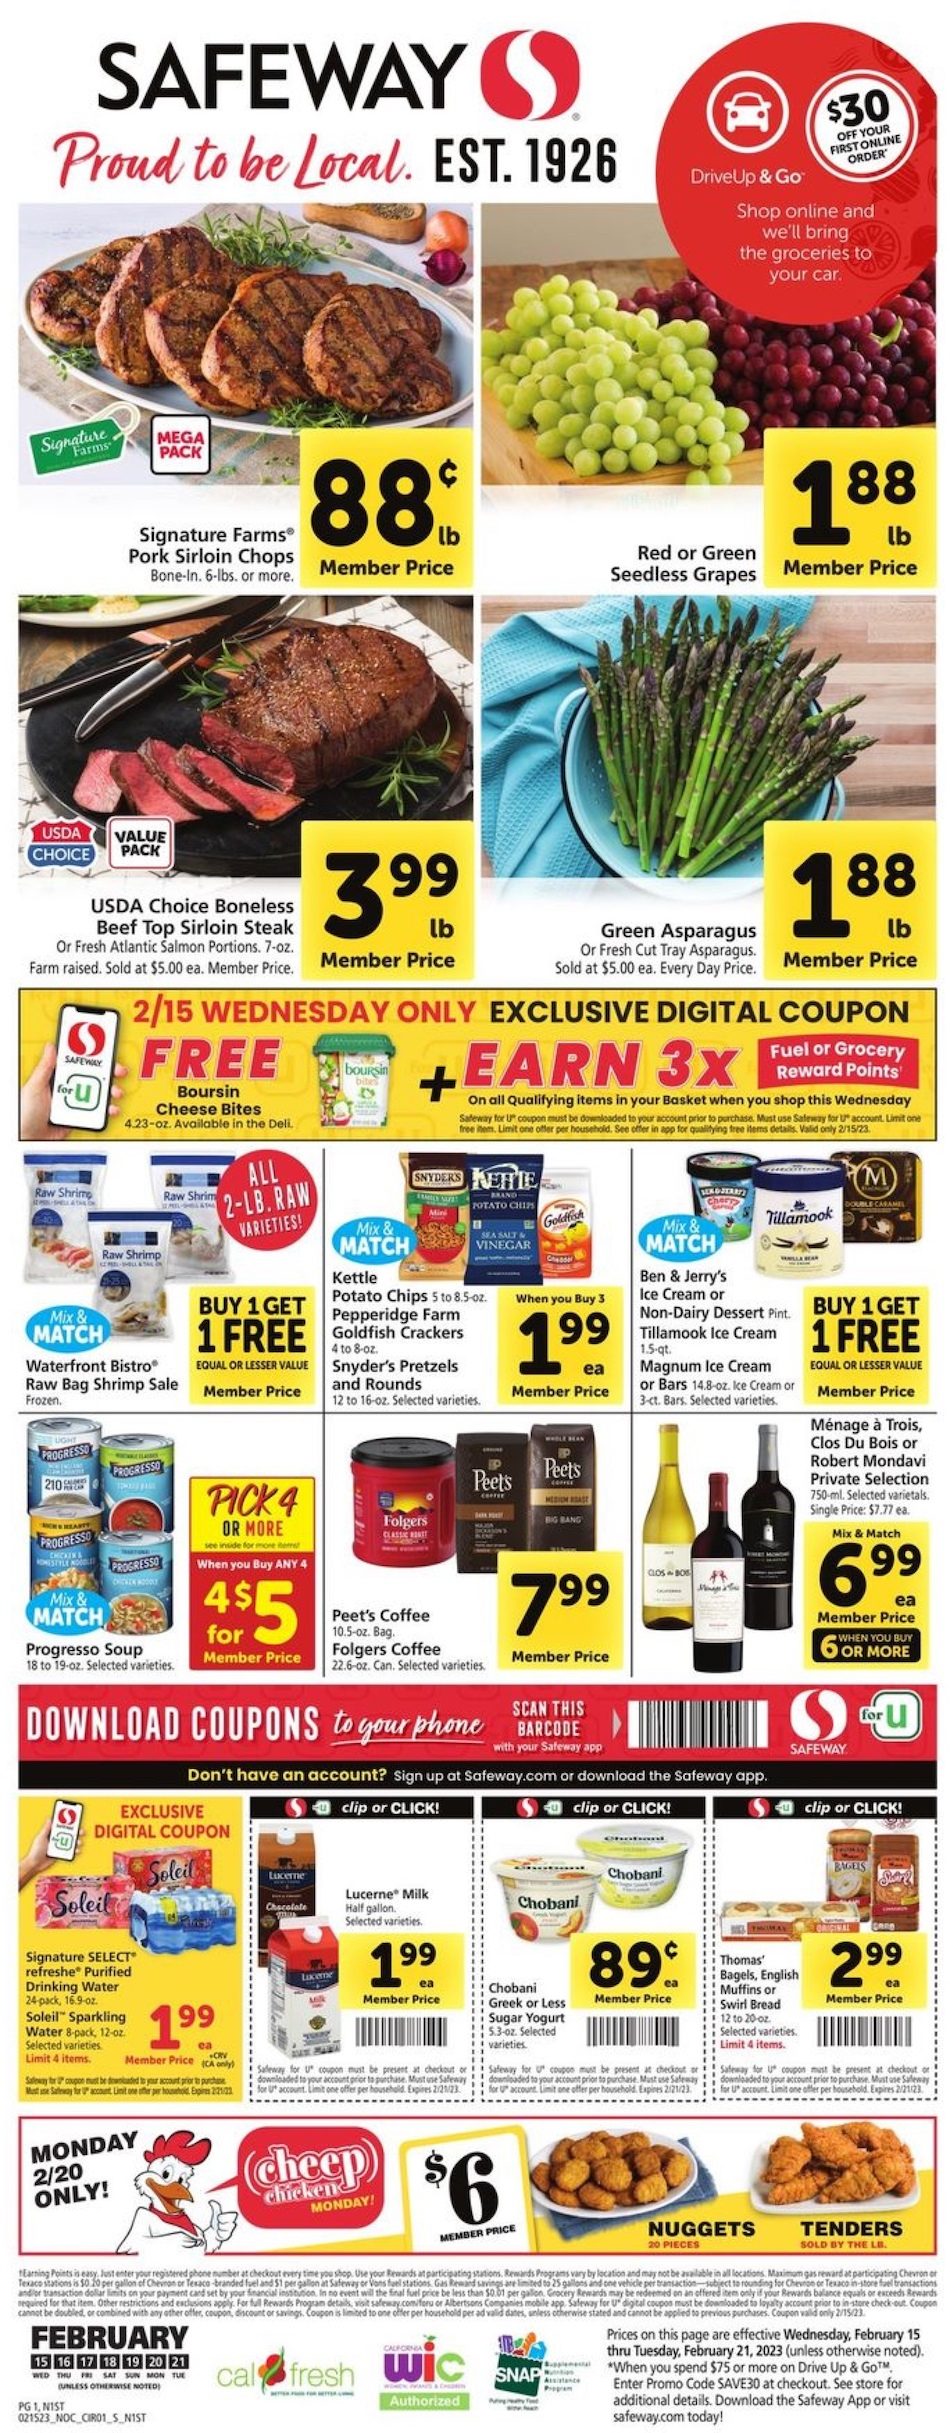 Safeway Weekly Ad 15th – 21st February 2023 Page 1